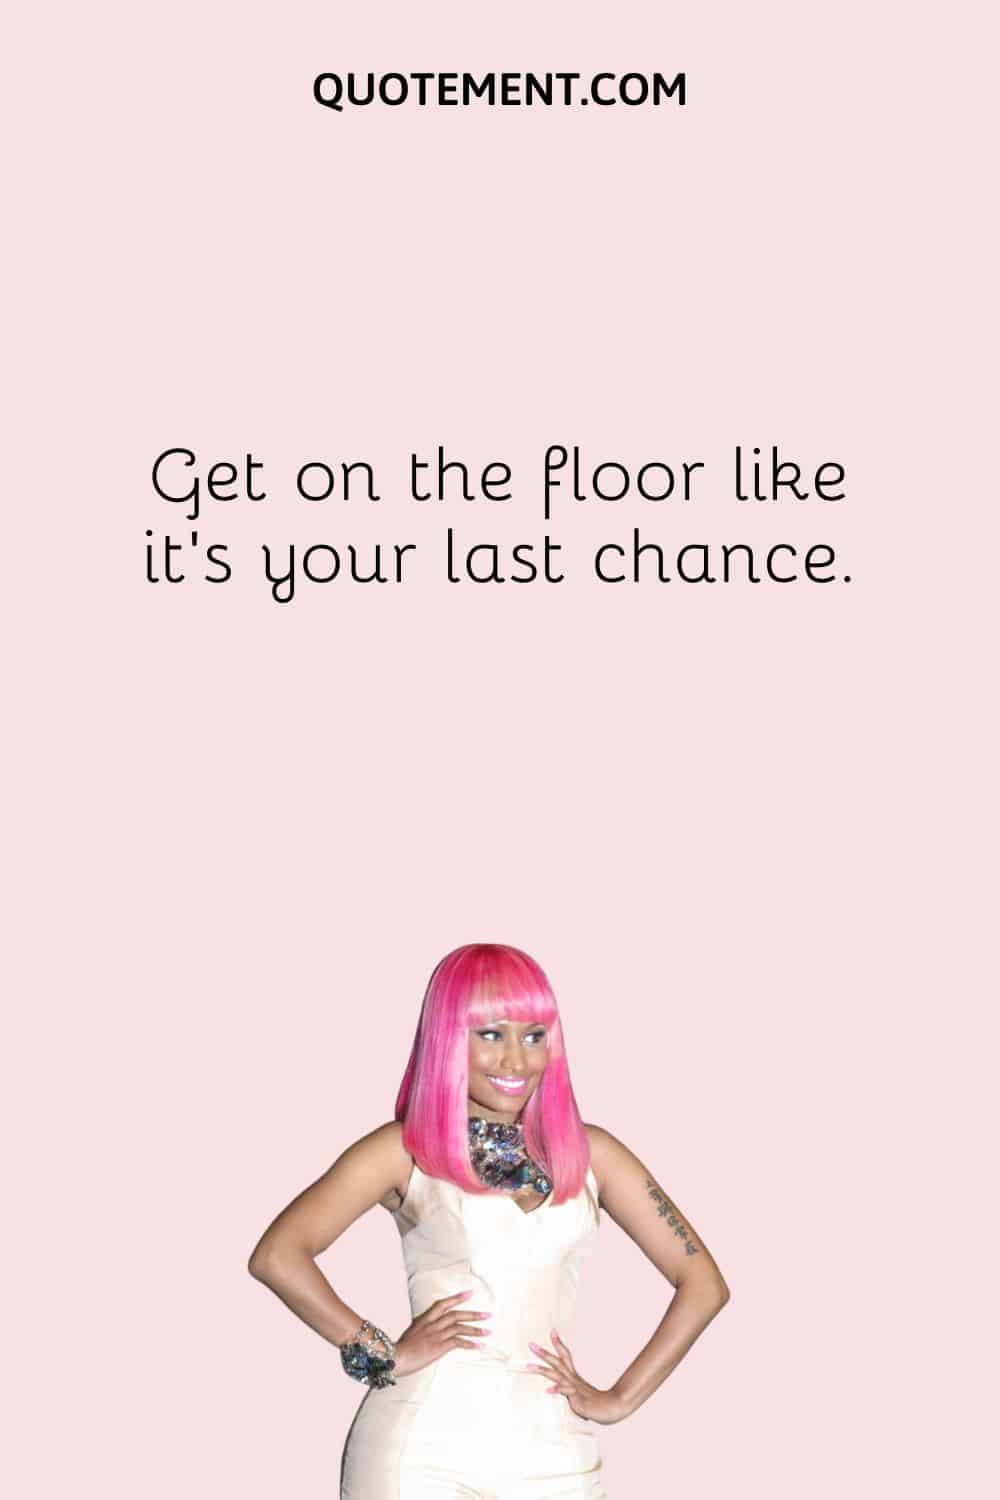 Get on the floor like it’s your last chance